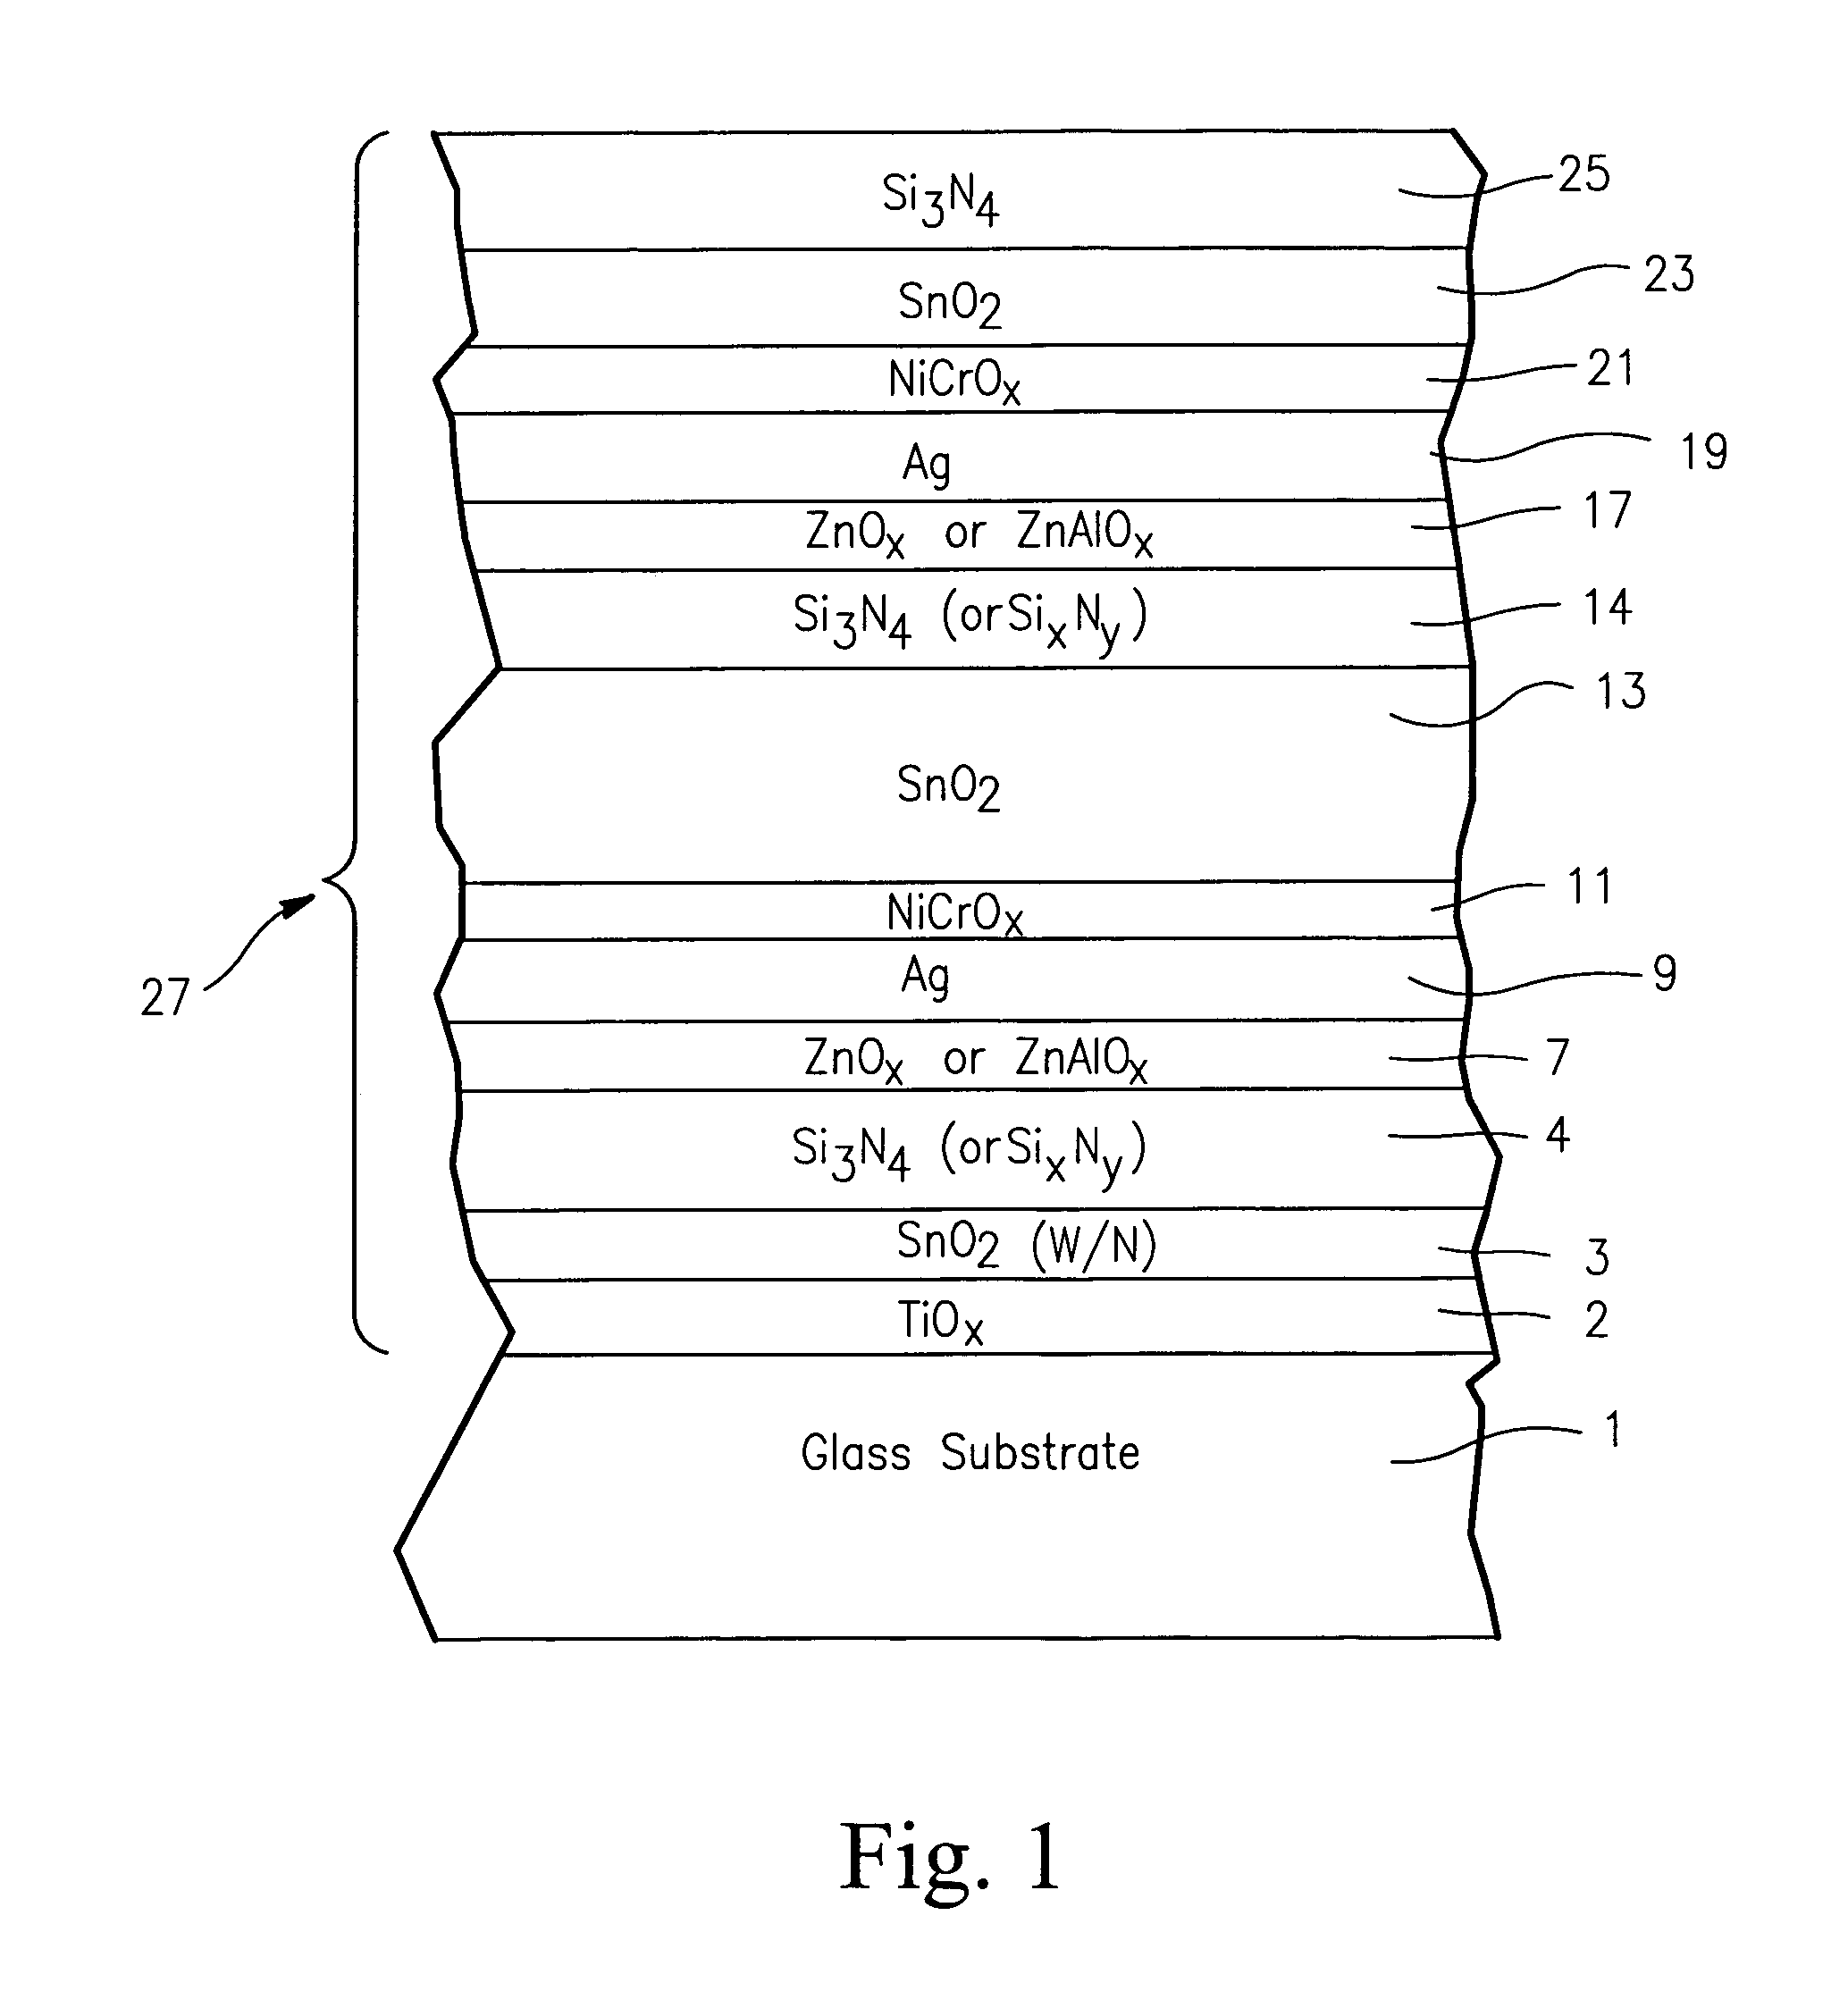 Heat treatable coated article with tin oxide inclusive layer between titanium oxide and silicon nitride